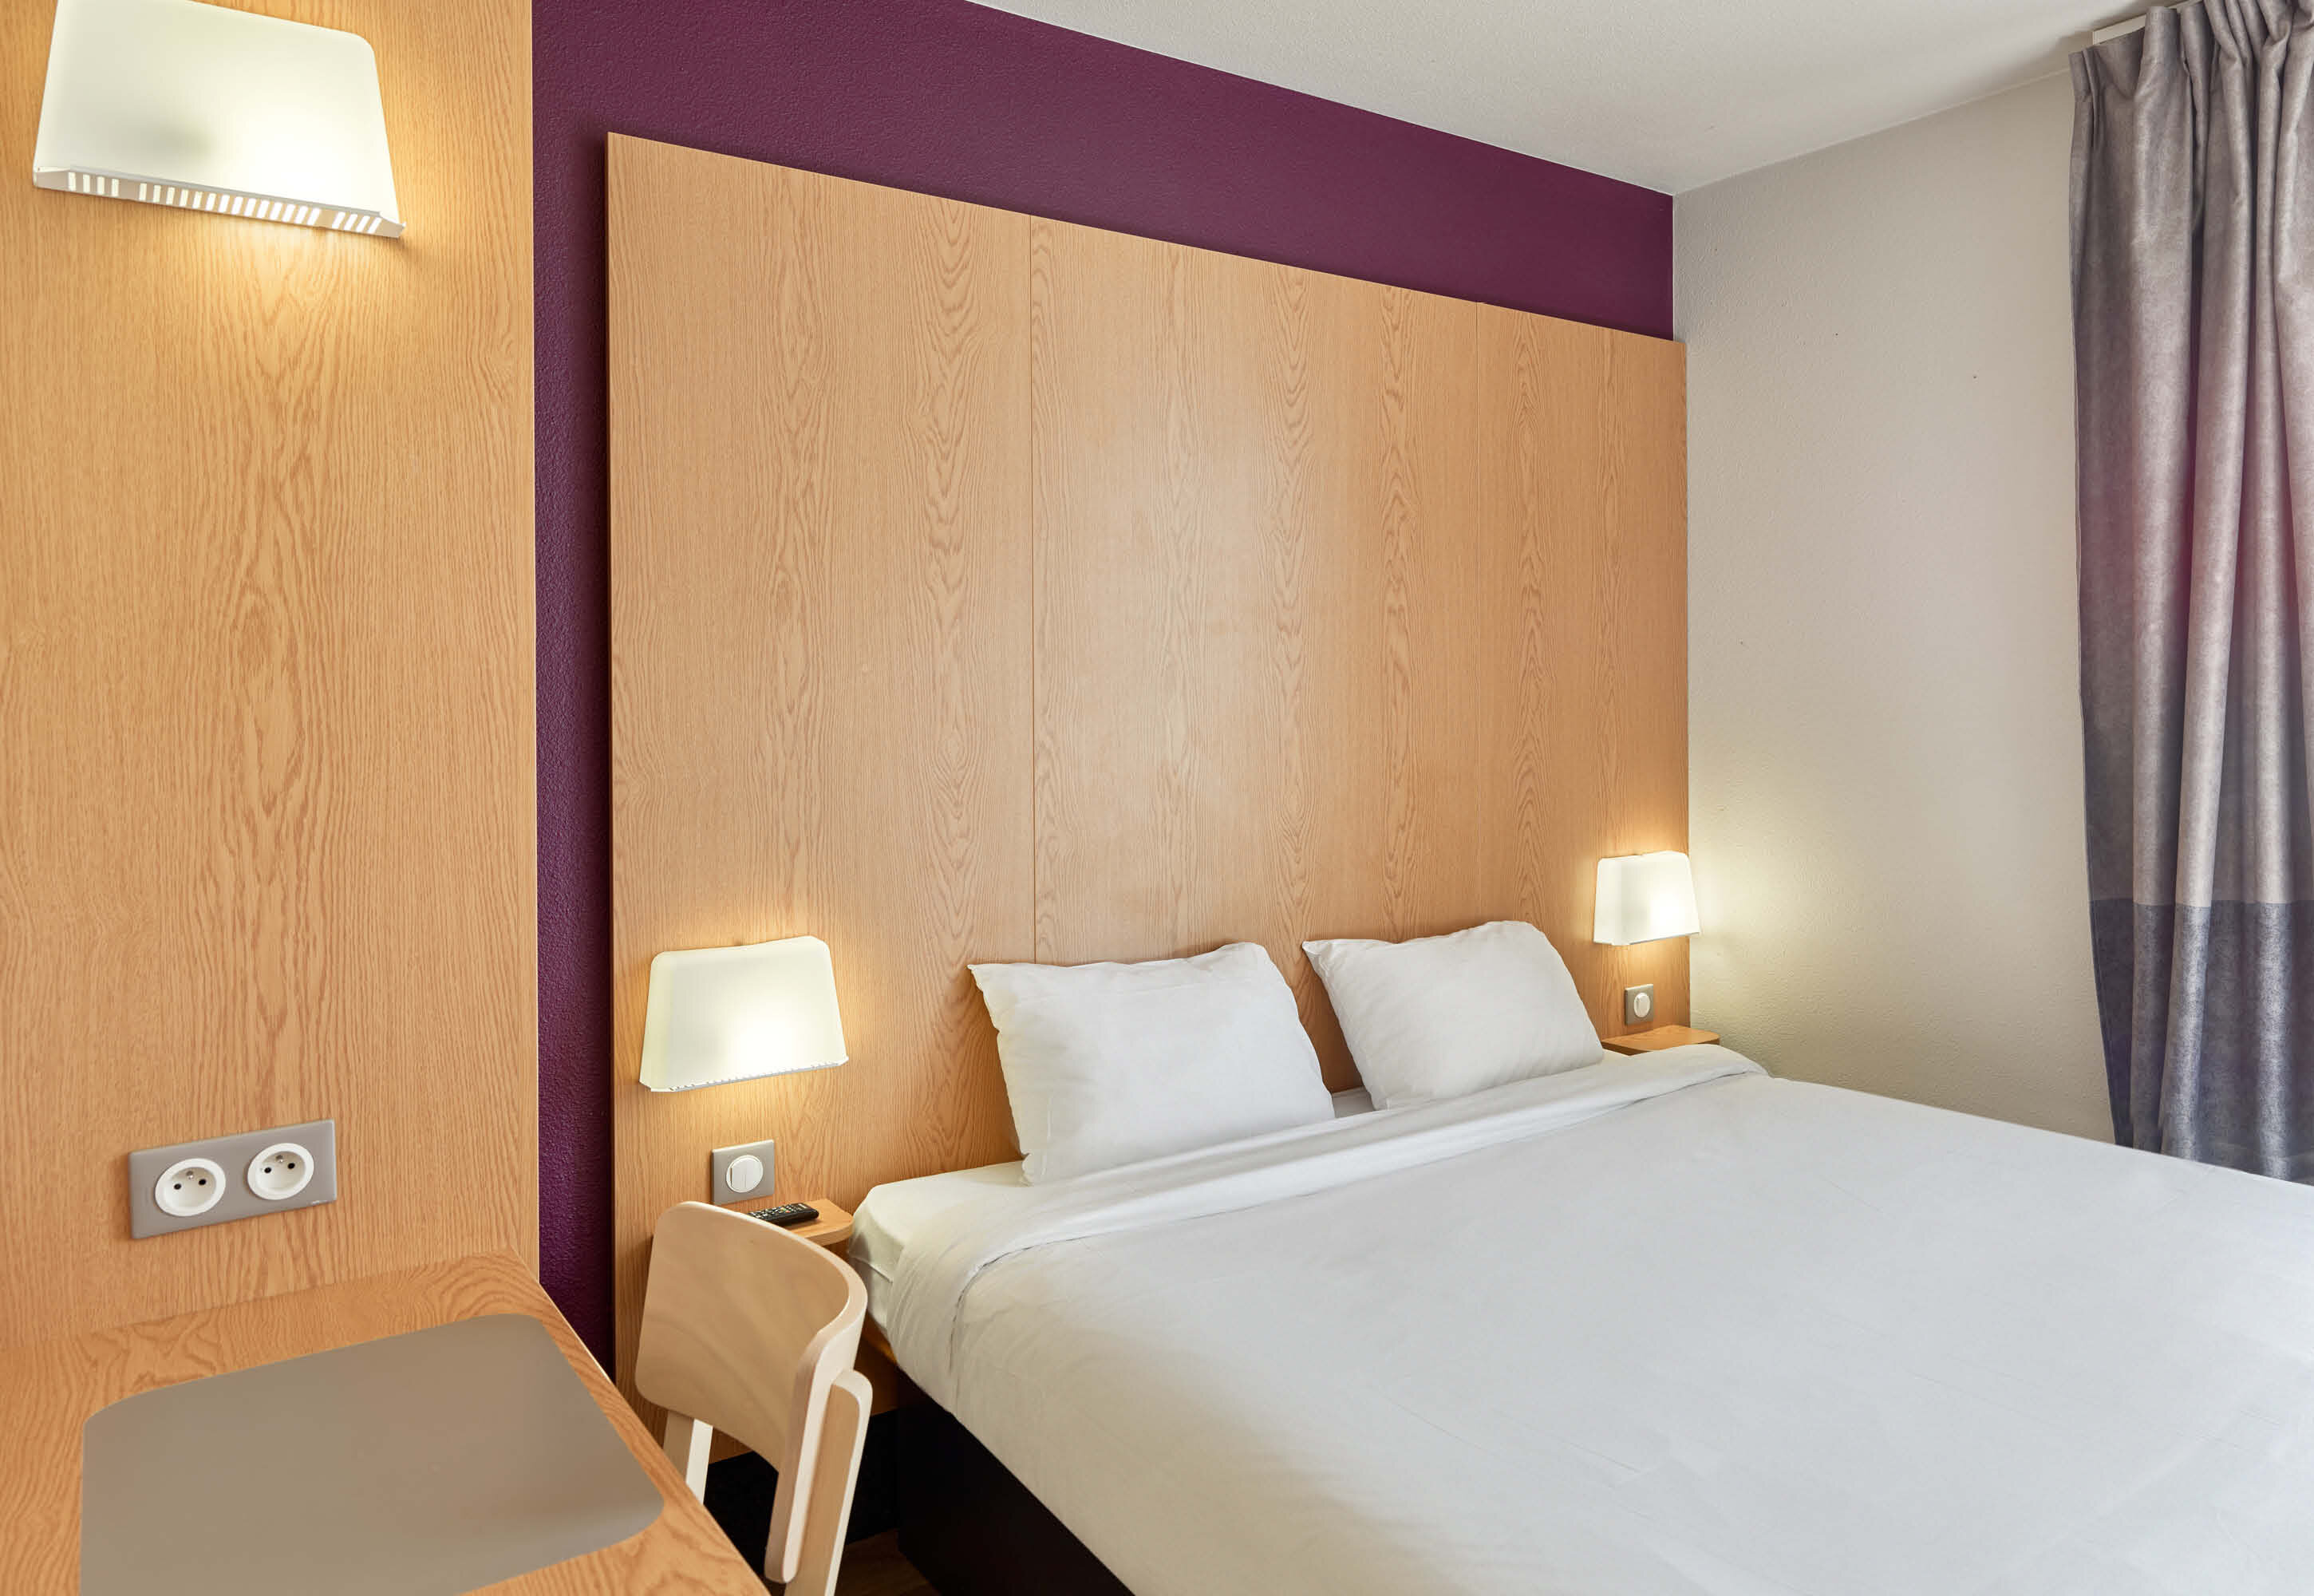 Images B&B HOTEL Orly Chevilly Marché International